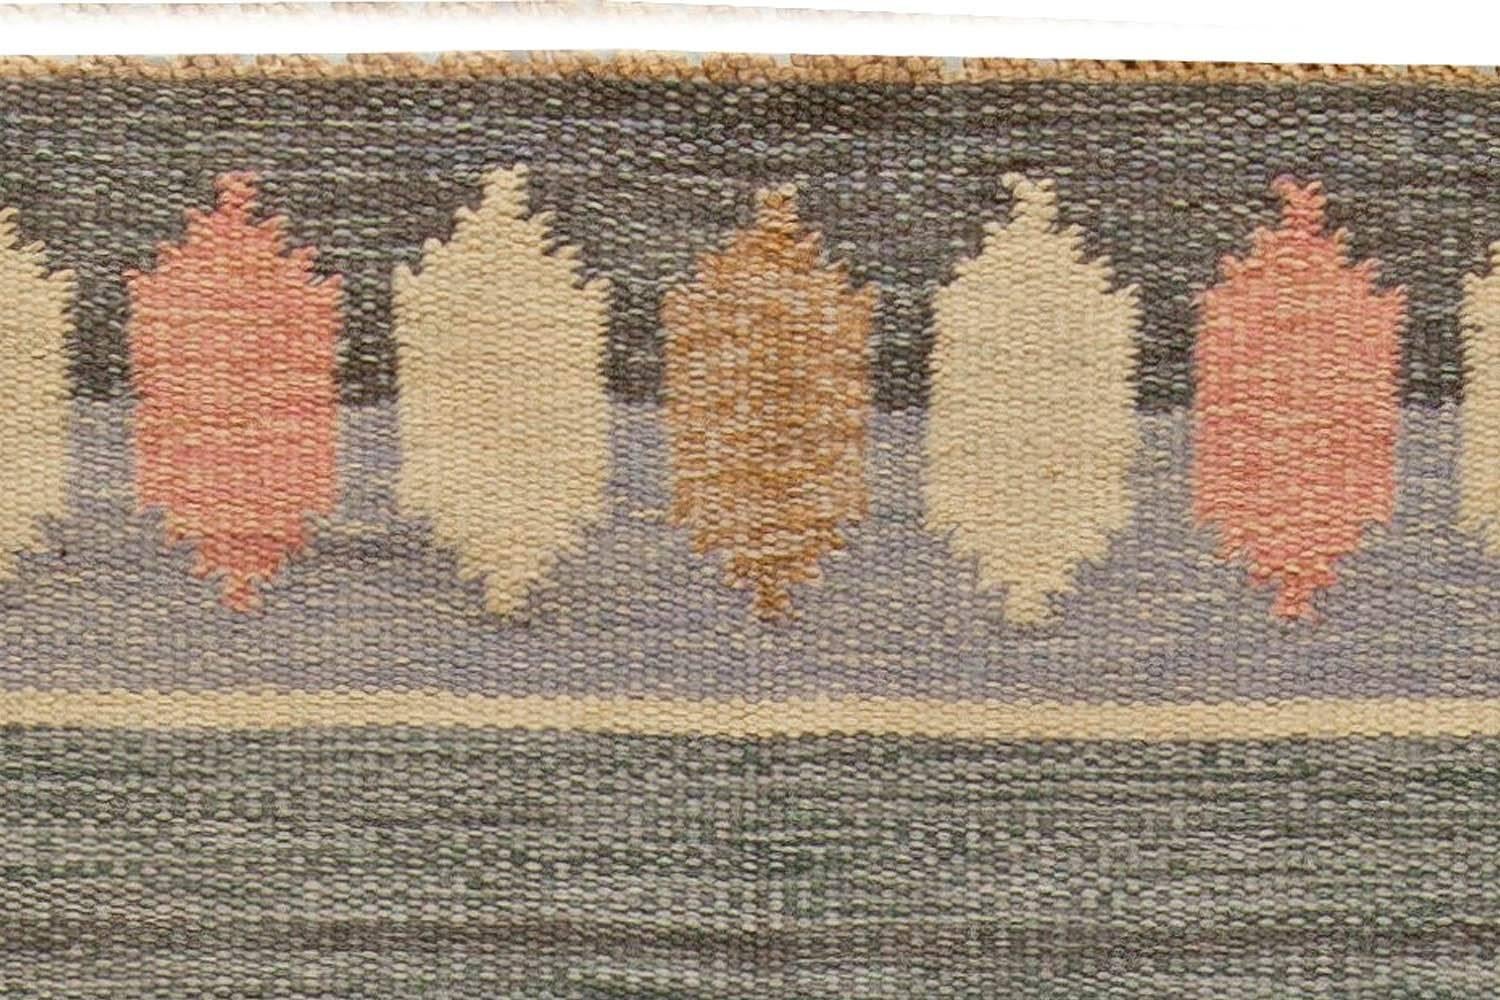 20th Century High-quality Vintage Swedish Flat-Weave Wool Rug Signed by Ingegerd Silow